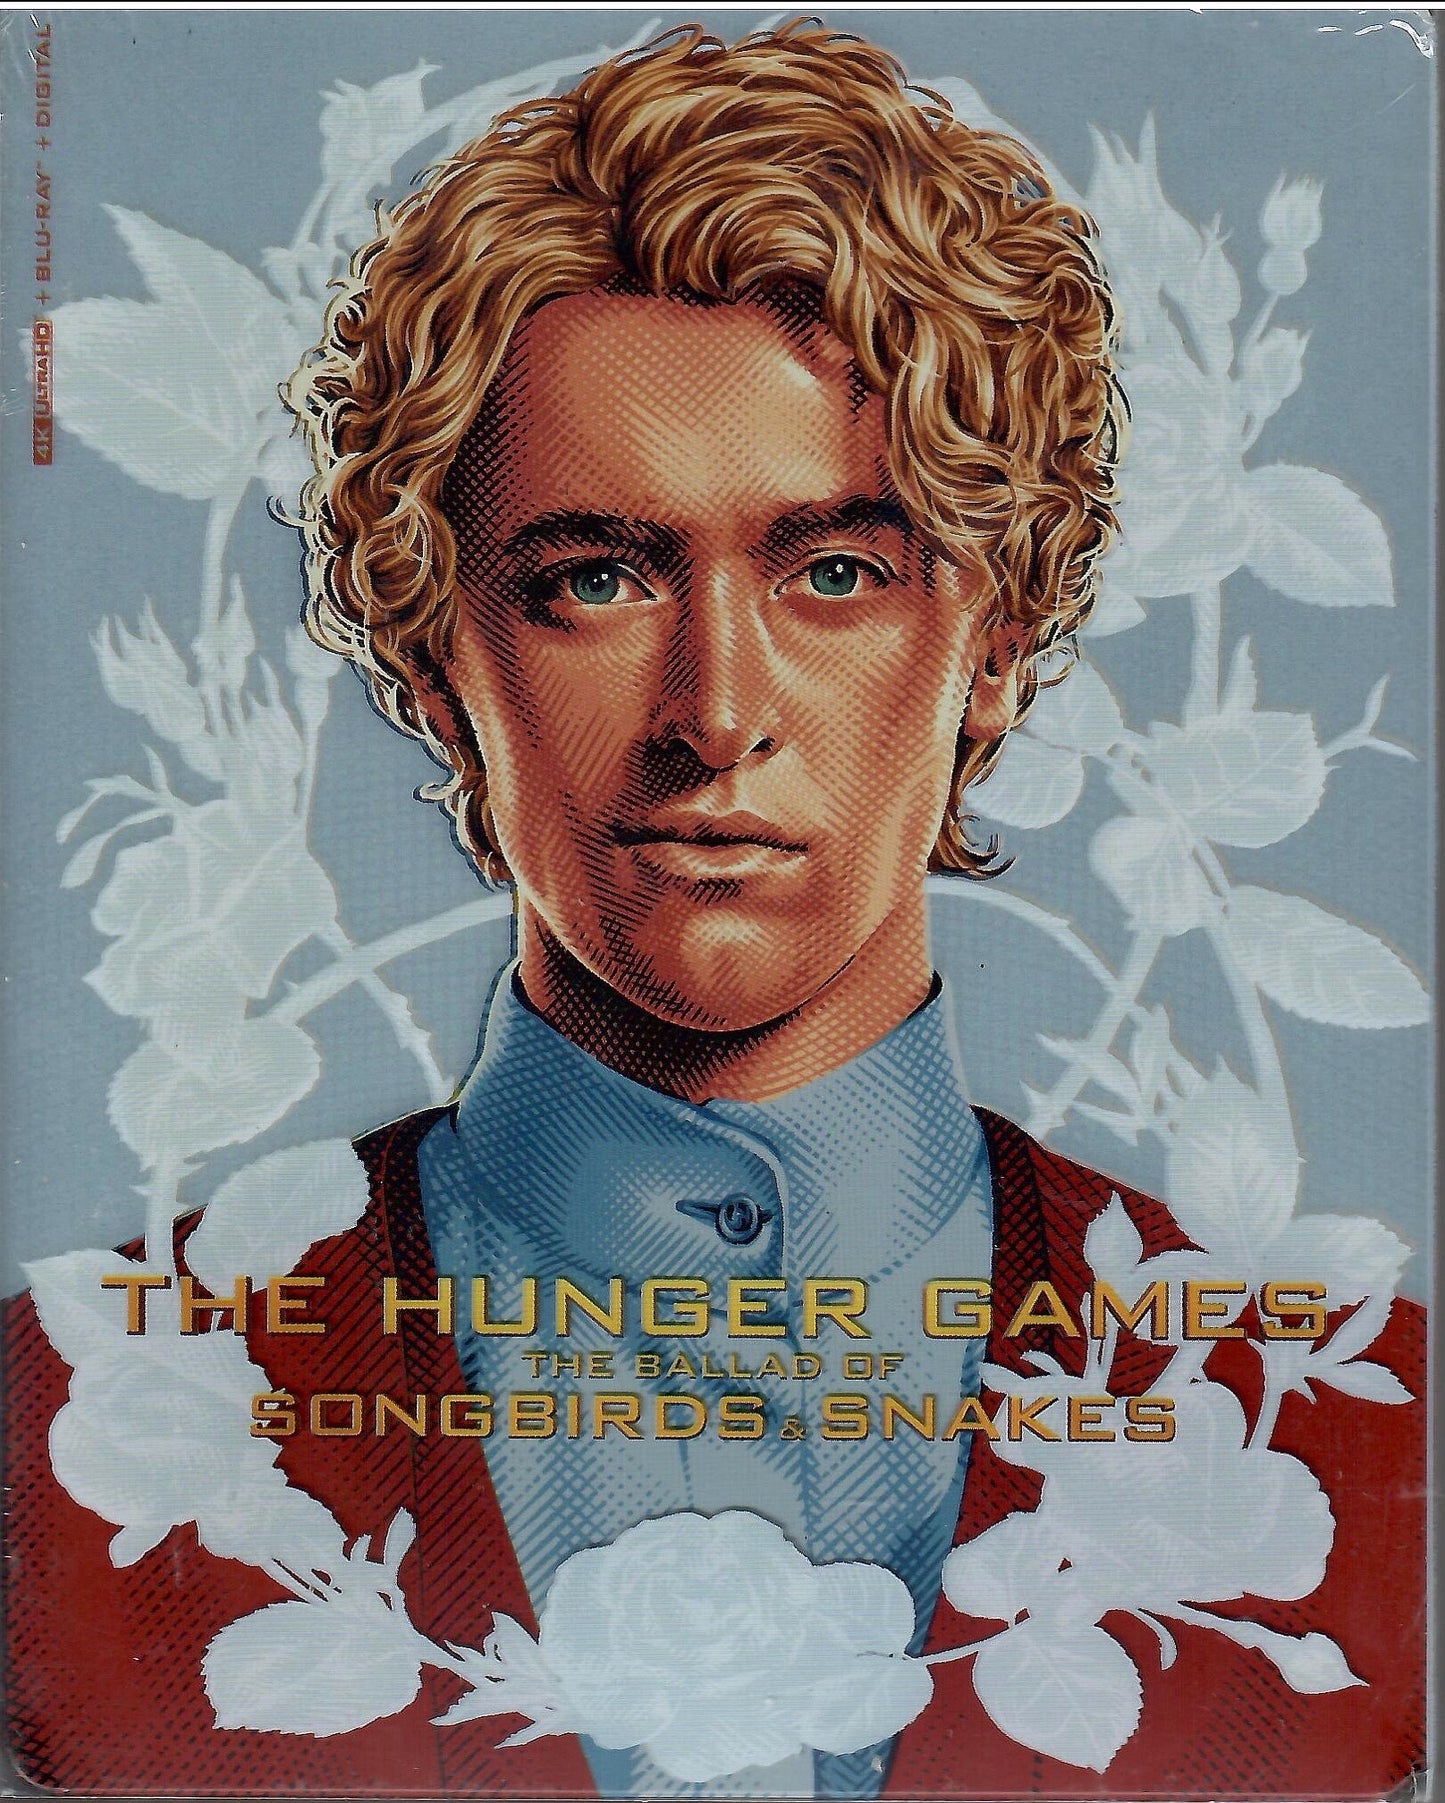 The Hunger Games: The Ballad of Songbirds and Snakes 4K SteelBook (Exclusive)